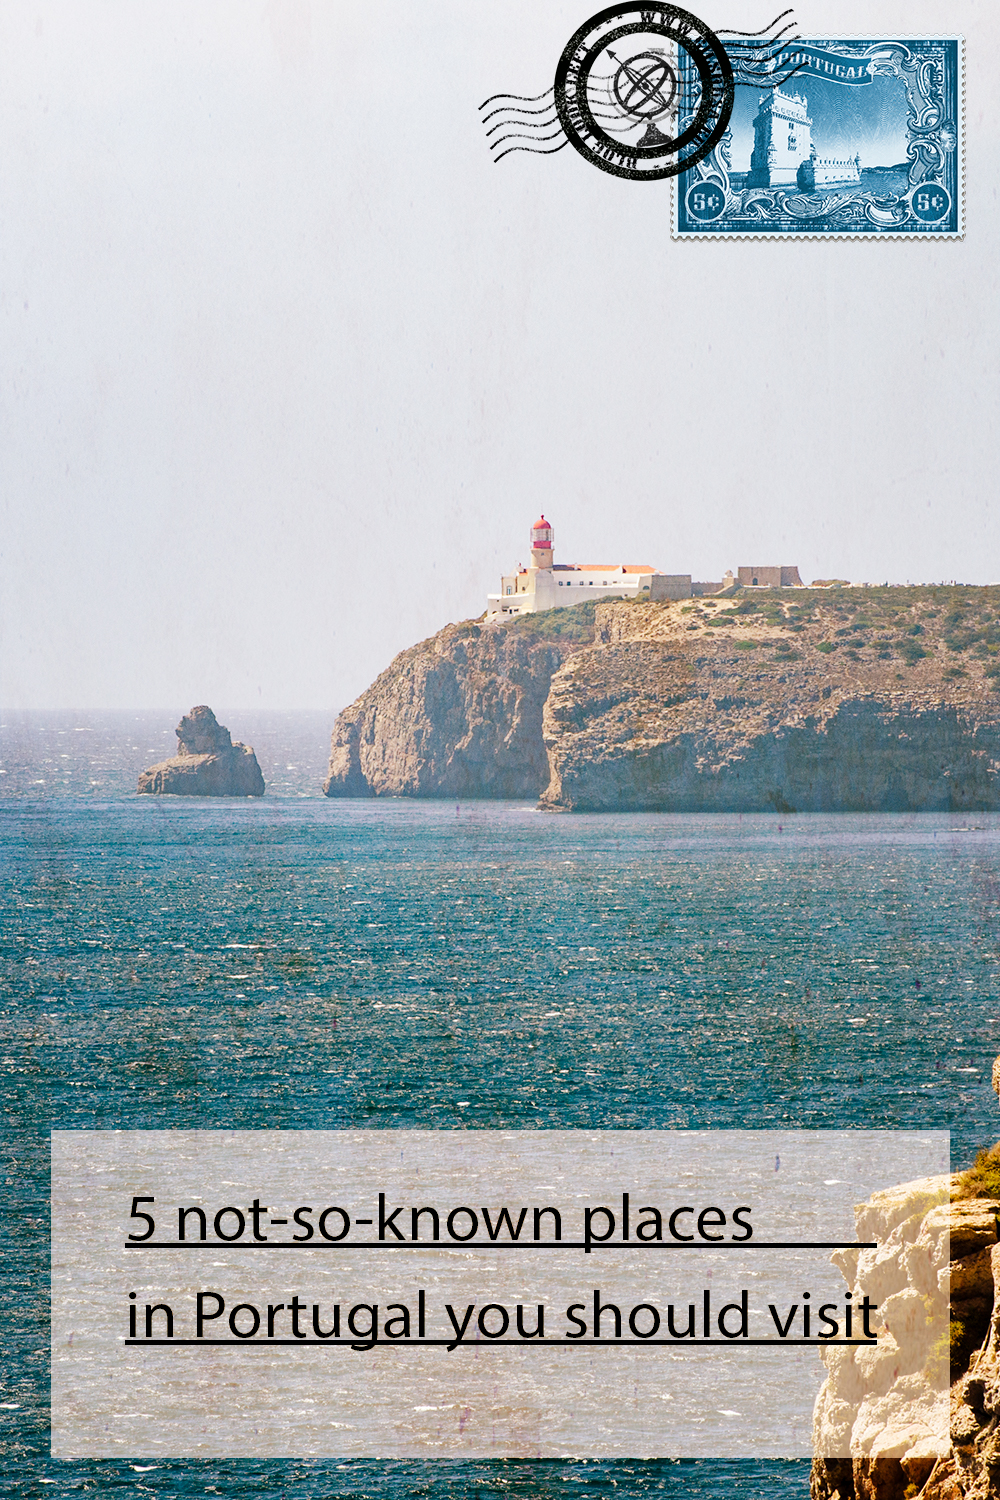 Ponta de Sagres - 5 not-so-known places in Portugal you should visit one day!